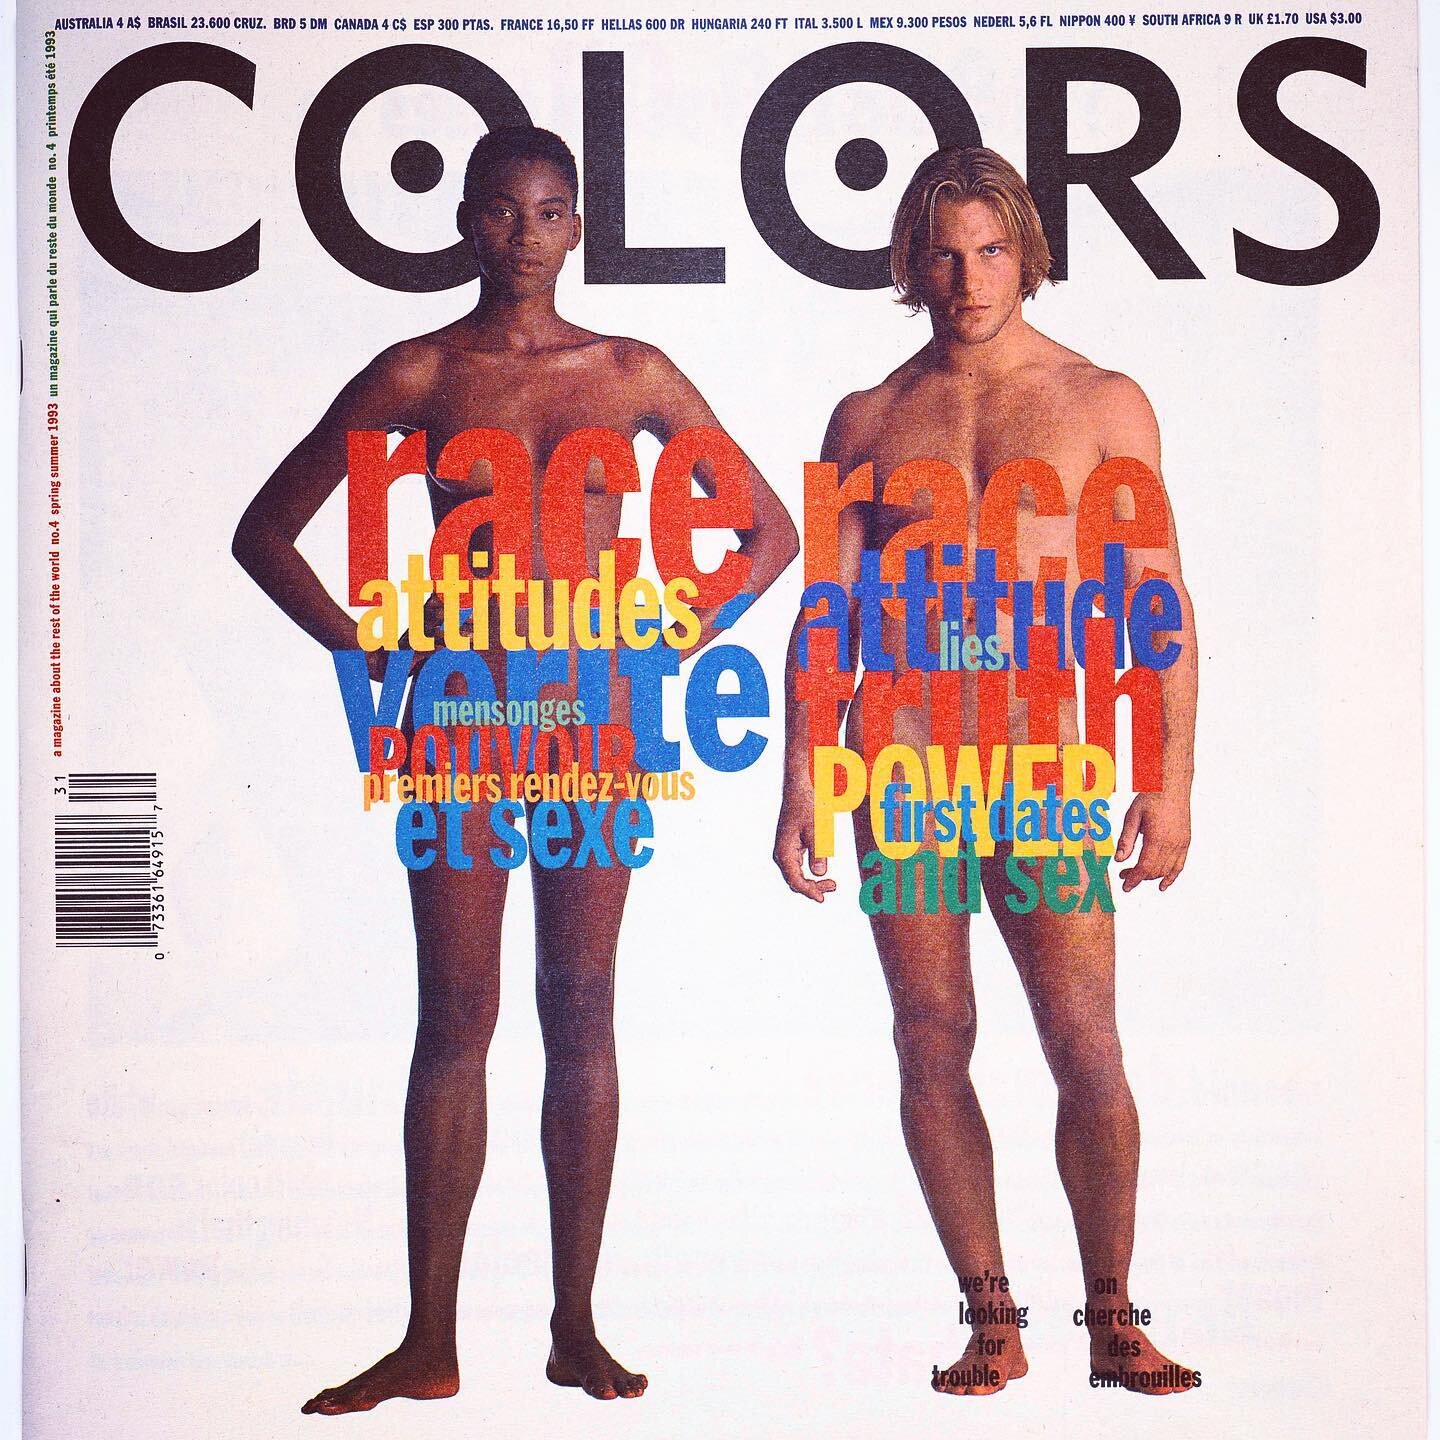 (1992) @COLORSmagazine Issue #4 - RACE

How has the conversation changed nearly 30 years later?